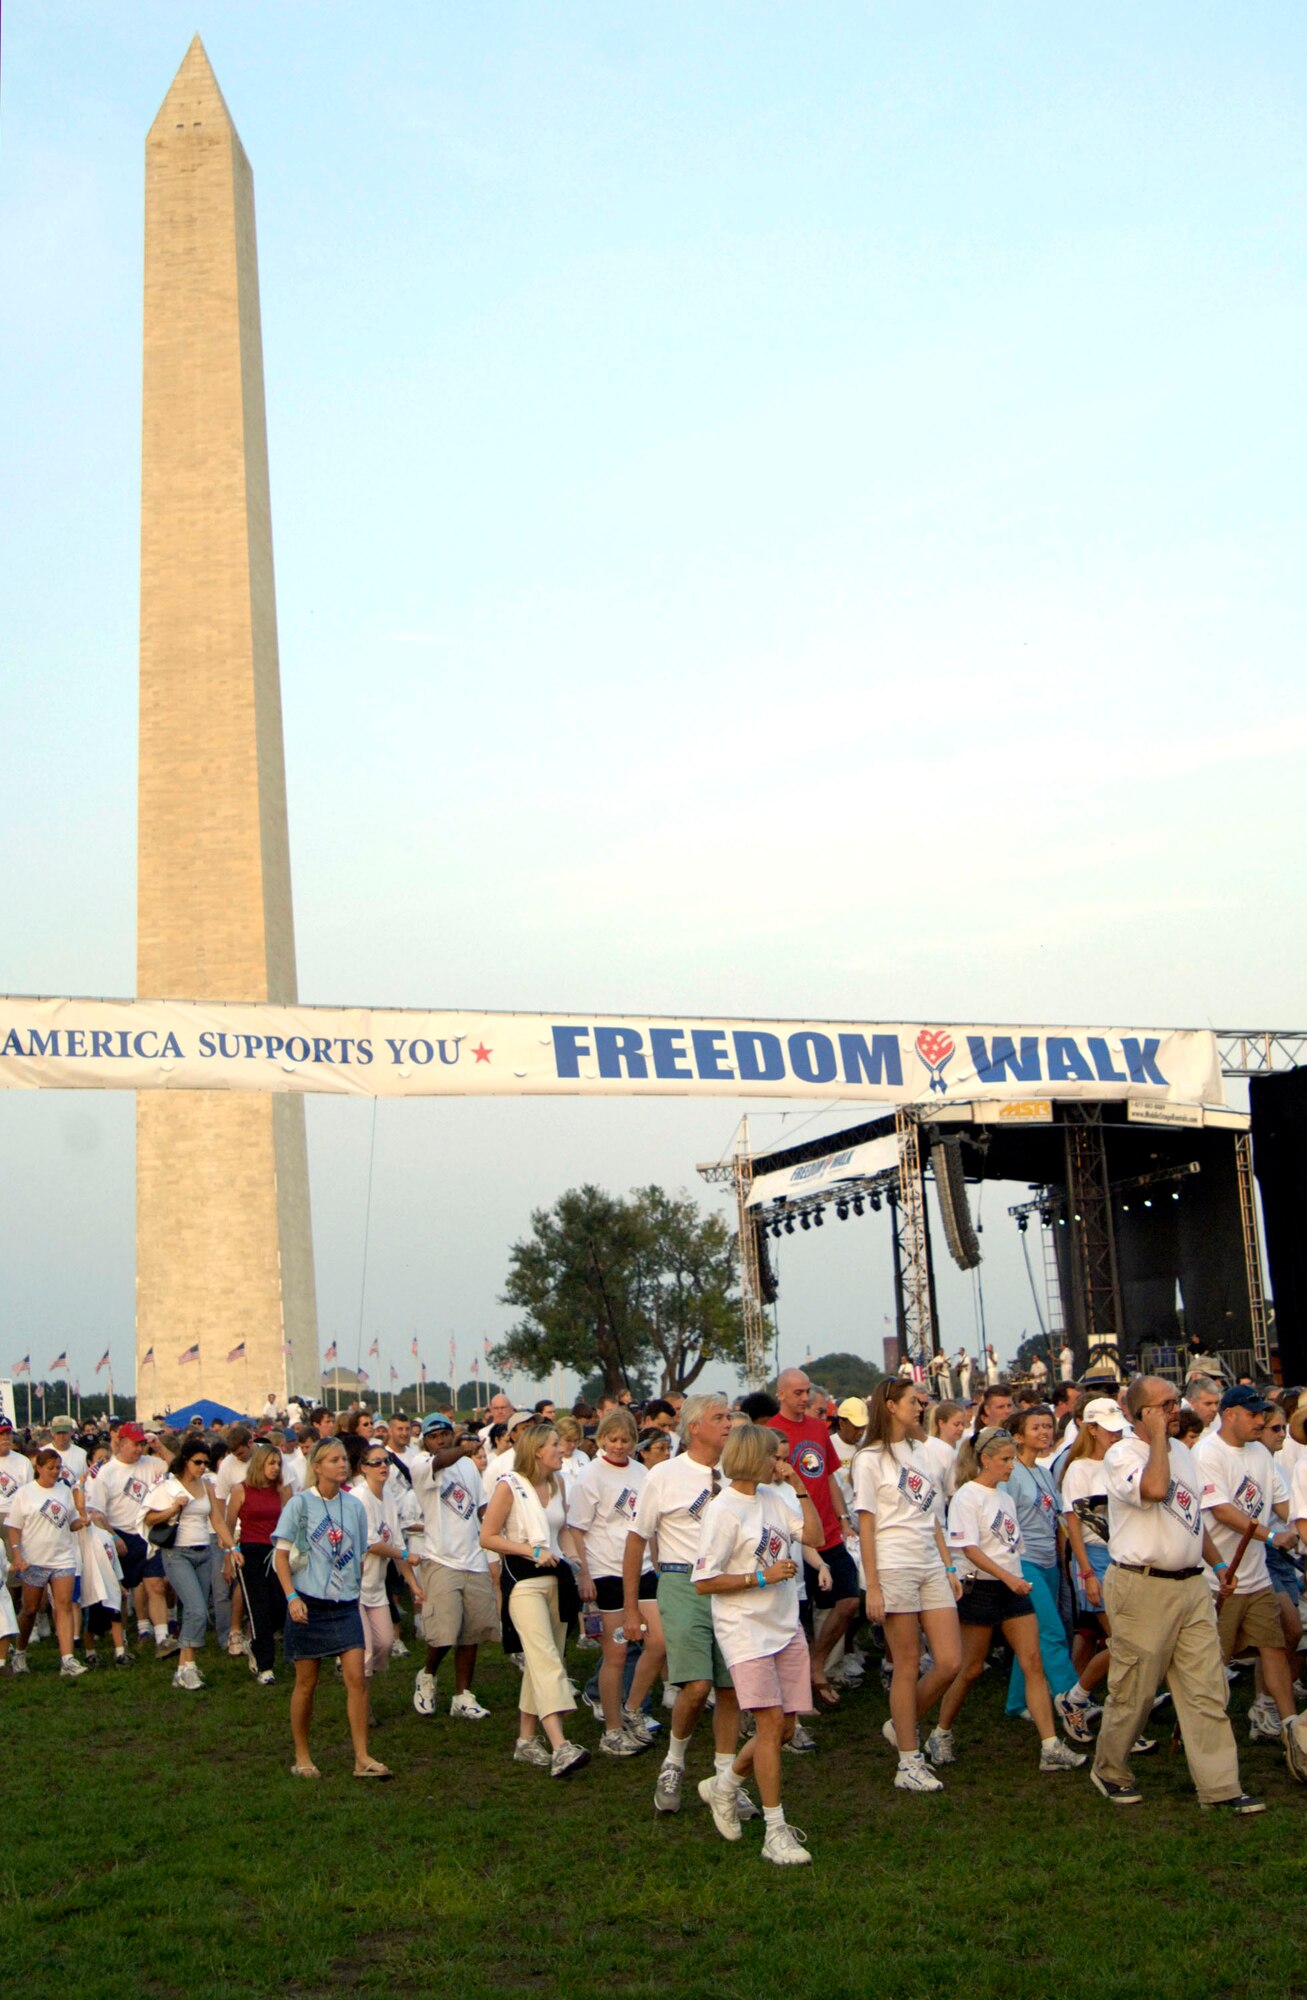 Thousands of participants start walking from the Washington Monument Sept. 10 to honor those who lost their lives Sept. 11, 2001, as a result of the terrorist attacks in New York, Washington and Pennsylvania. The walk concluded at the Pentagon where opera singer Denyse Graves performed. The Pentagon was then illuminated with 184 beams of light to commemorate the 184 lives who were lost at the Pentagon. (U.S. Air Force photo/Tech. Sgt. Cohen A. Young)